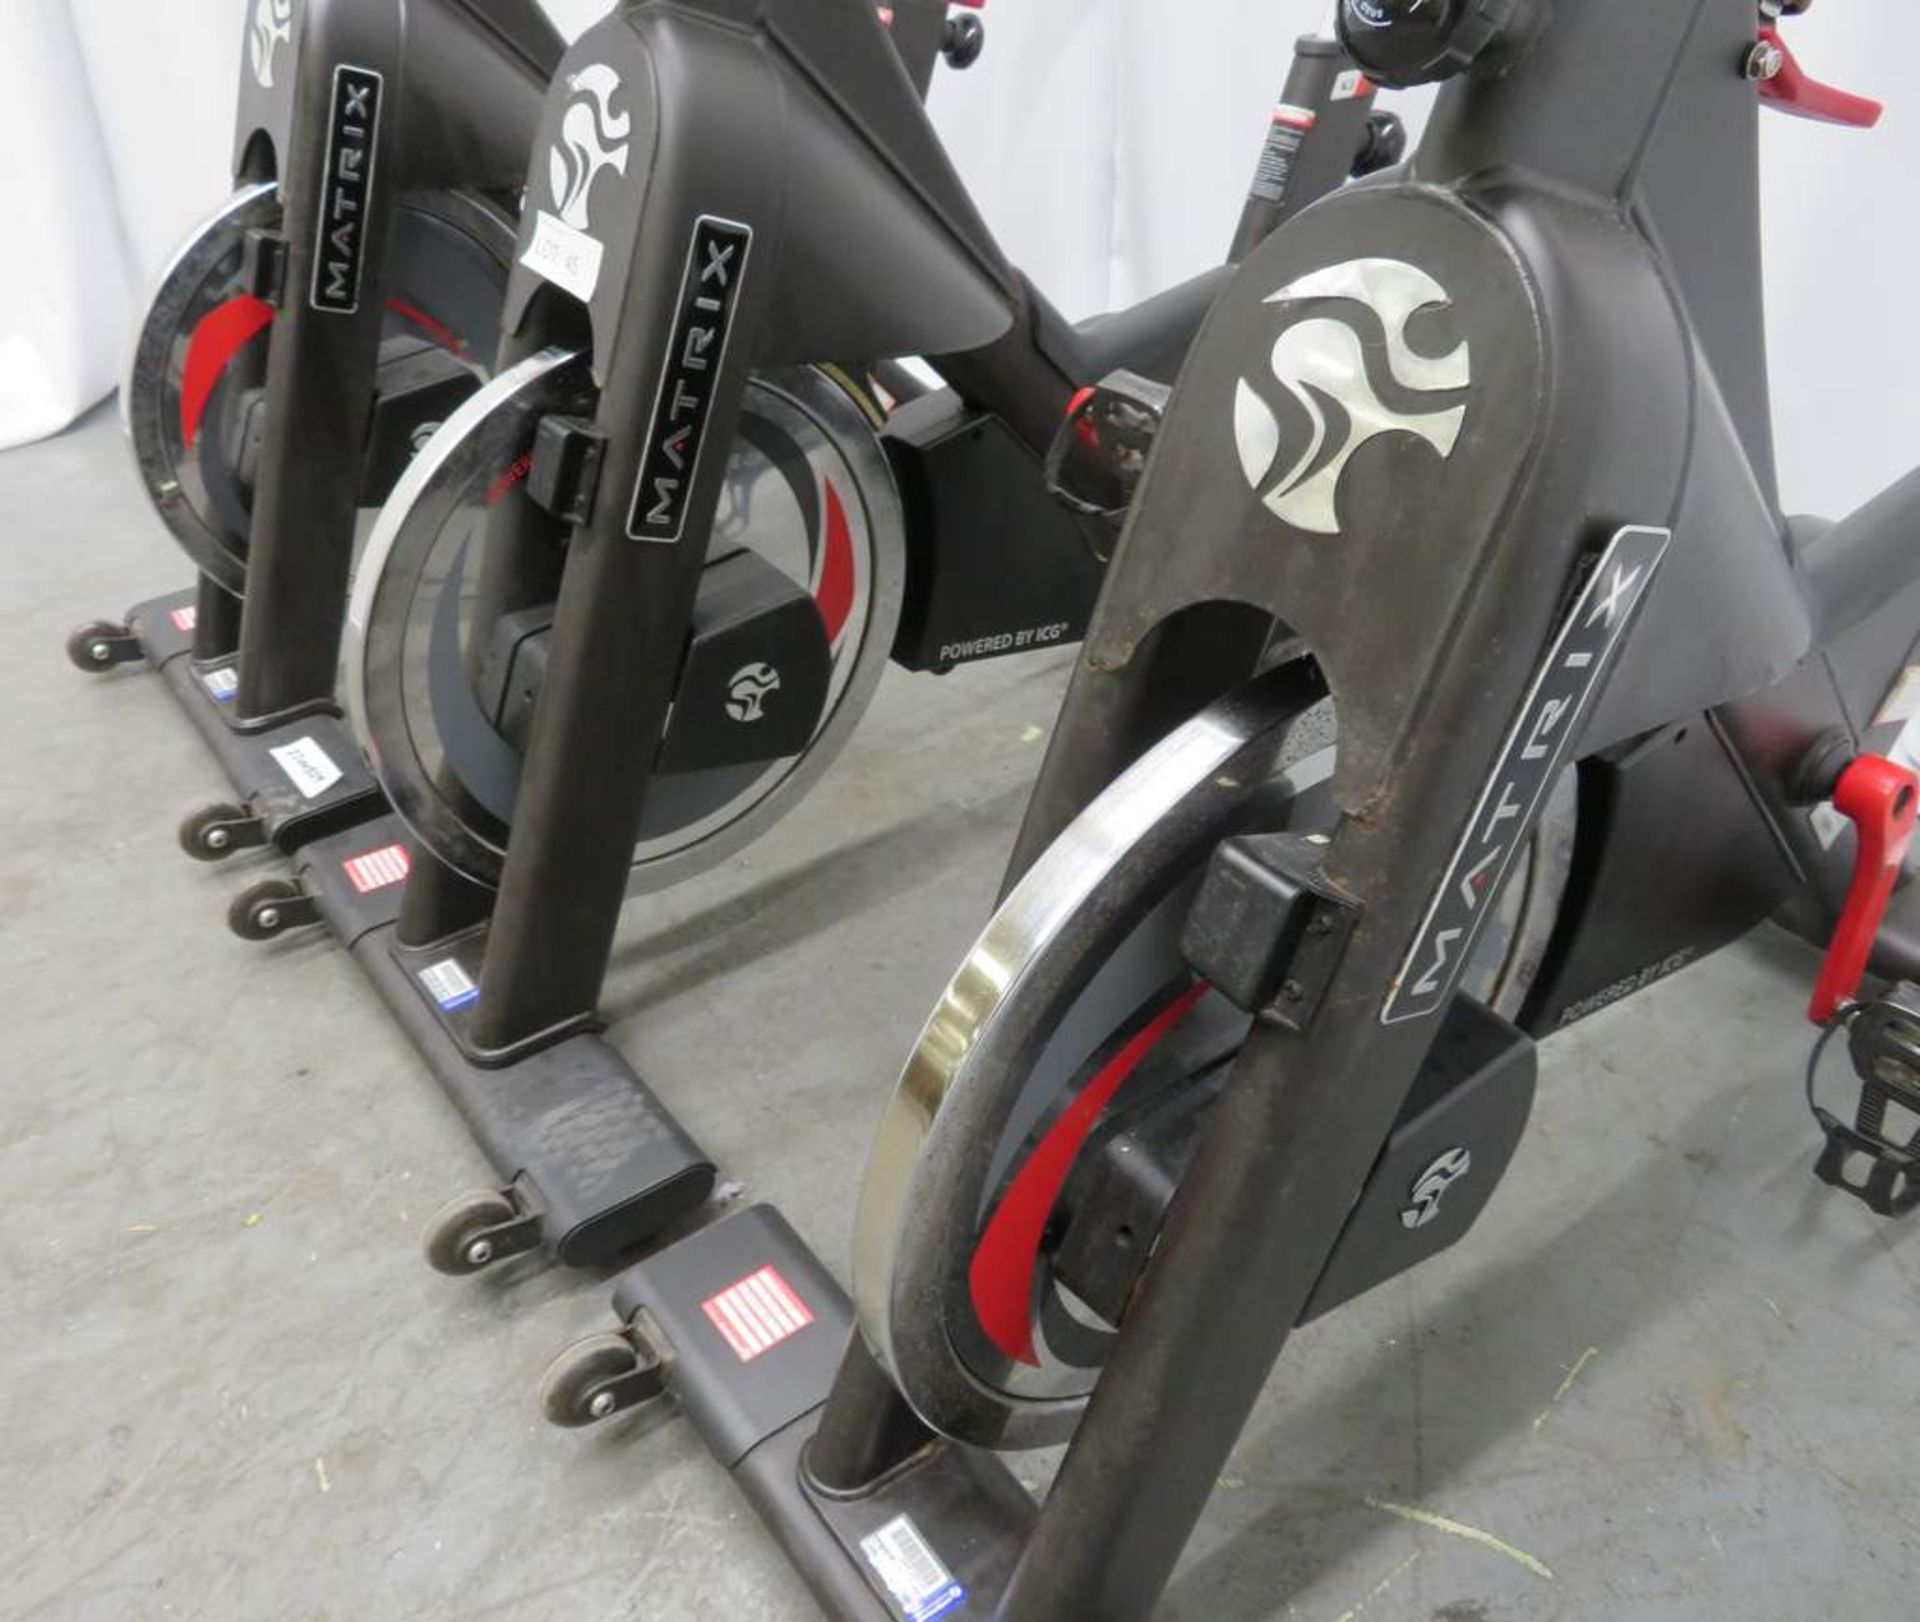 3x Matrix Model: IC3 Series Spin Bike, Complete With Digital Console. - Image 3 of 10